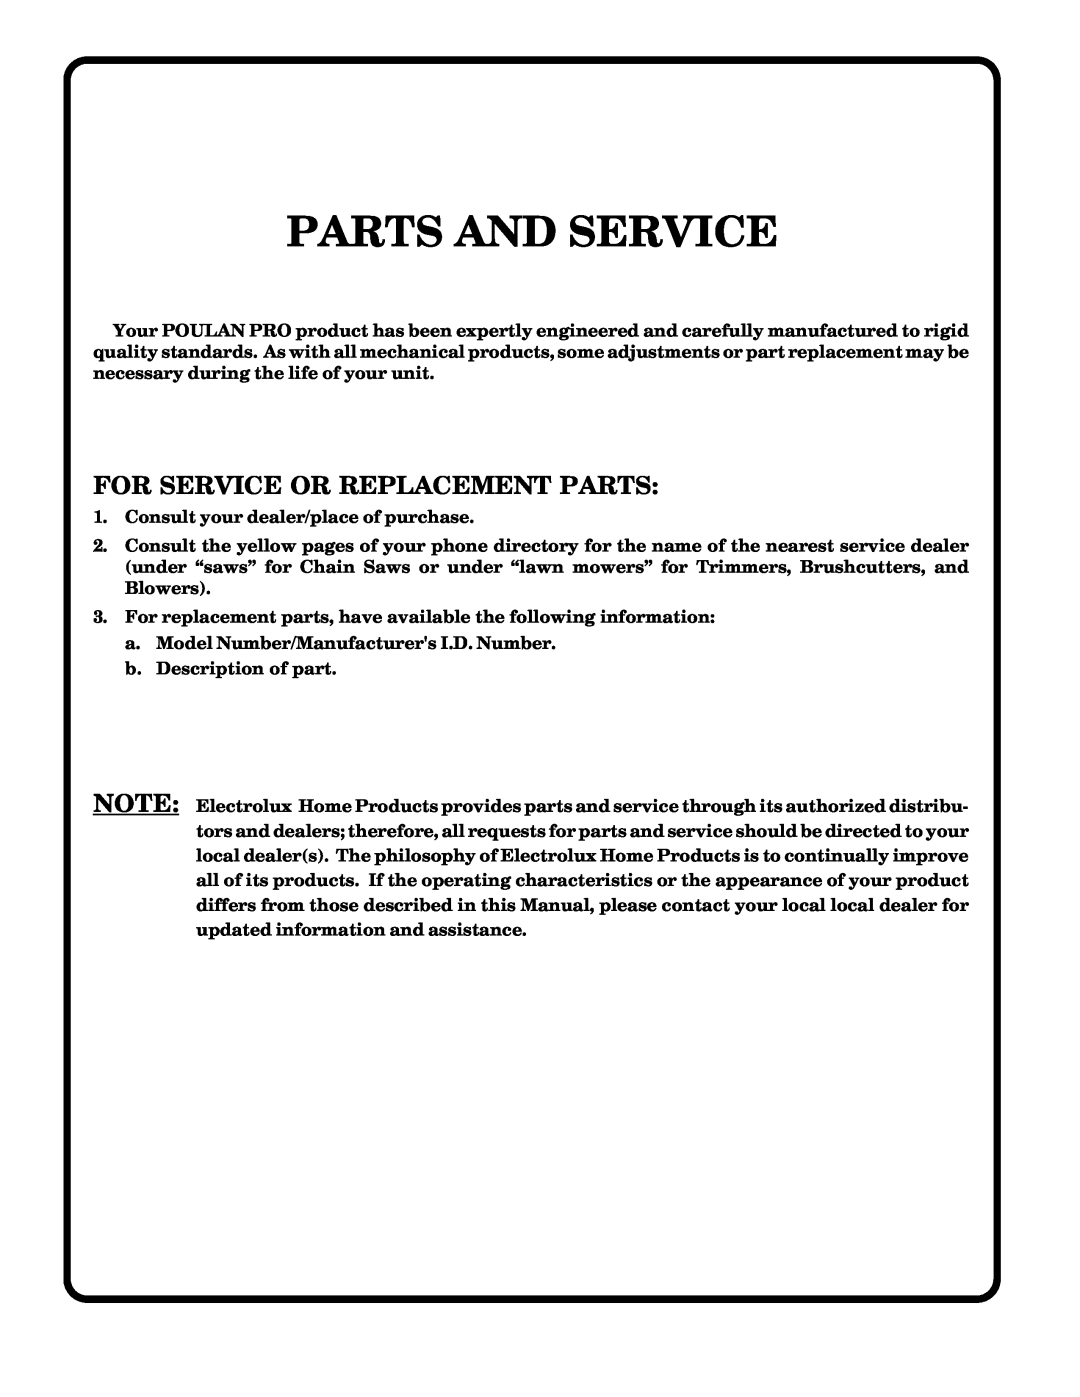 Poulan 178249 owner manual Parts And Service, For Service Or Replacement Parts 